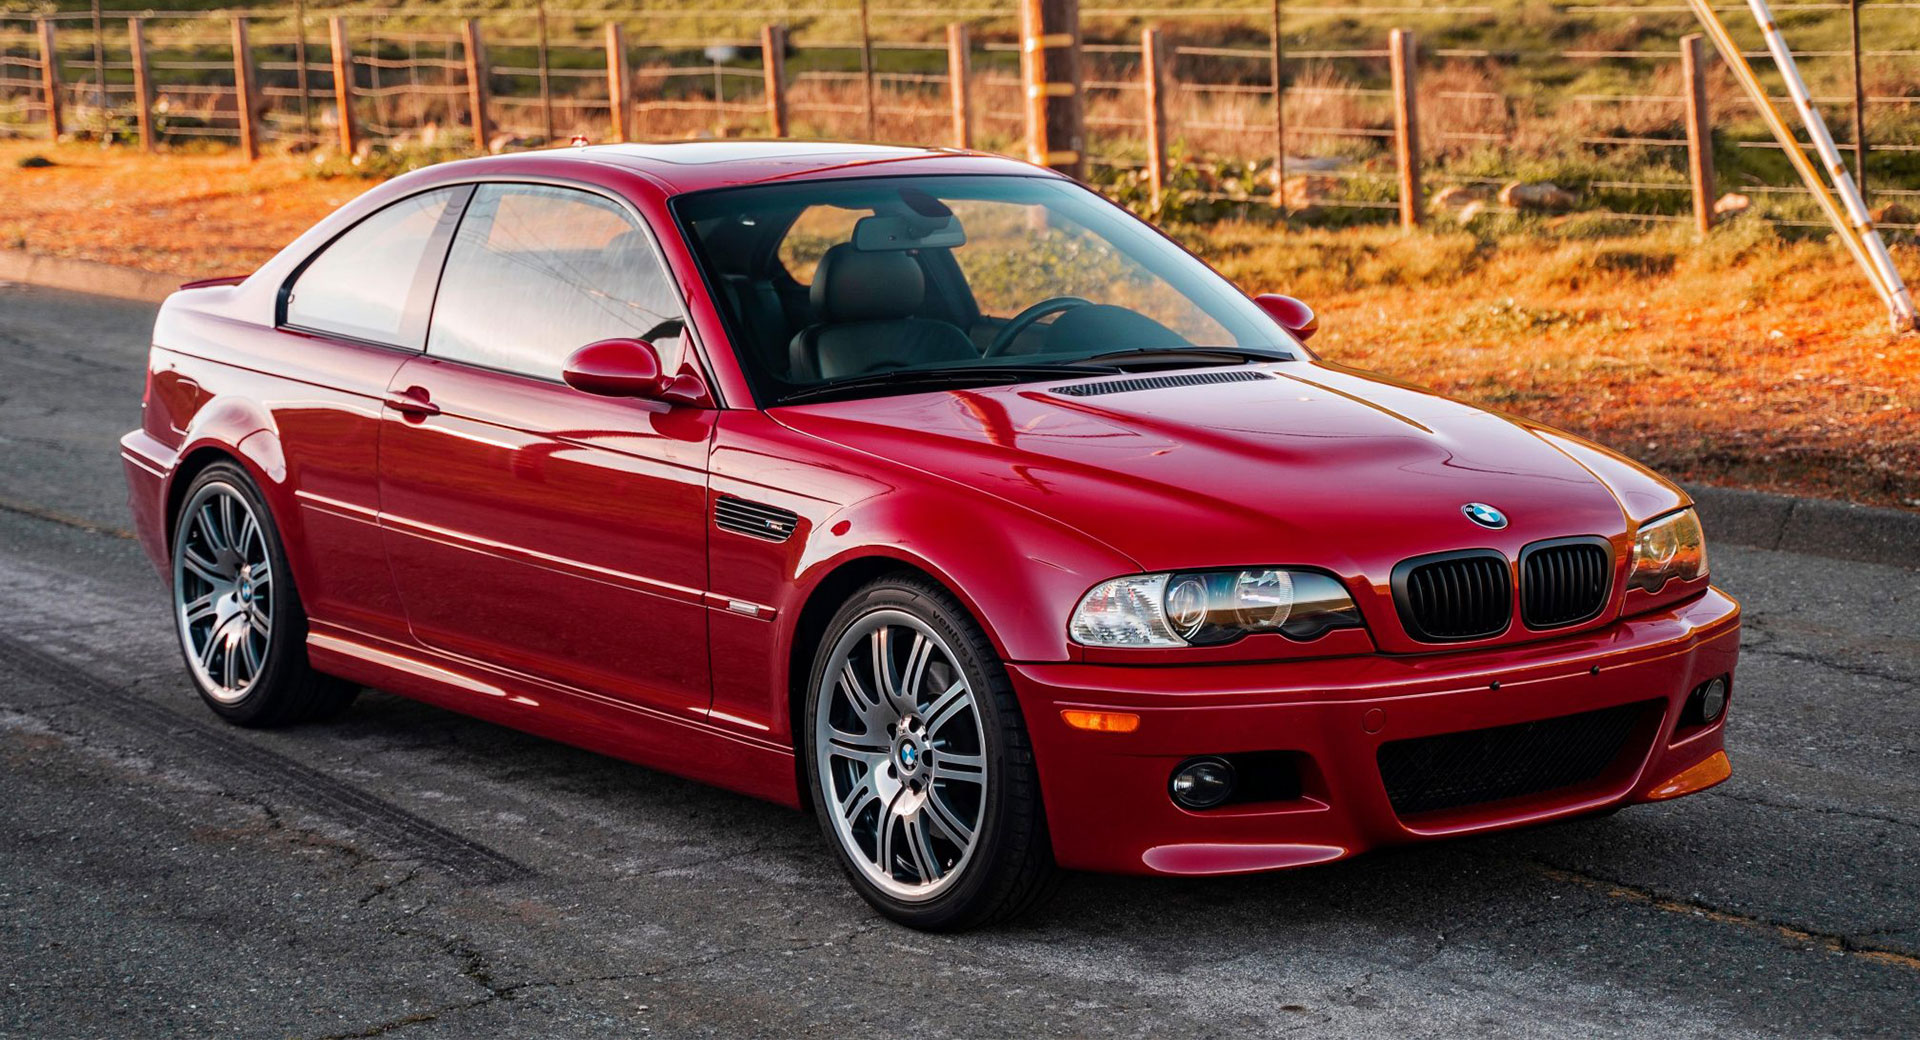 This Low-Mileage BMW E46 M3 Is Fast Approaching The Price Of A New